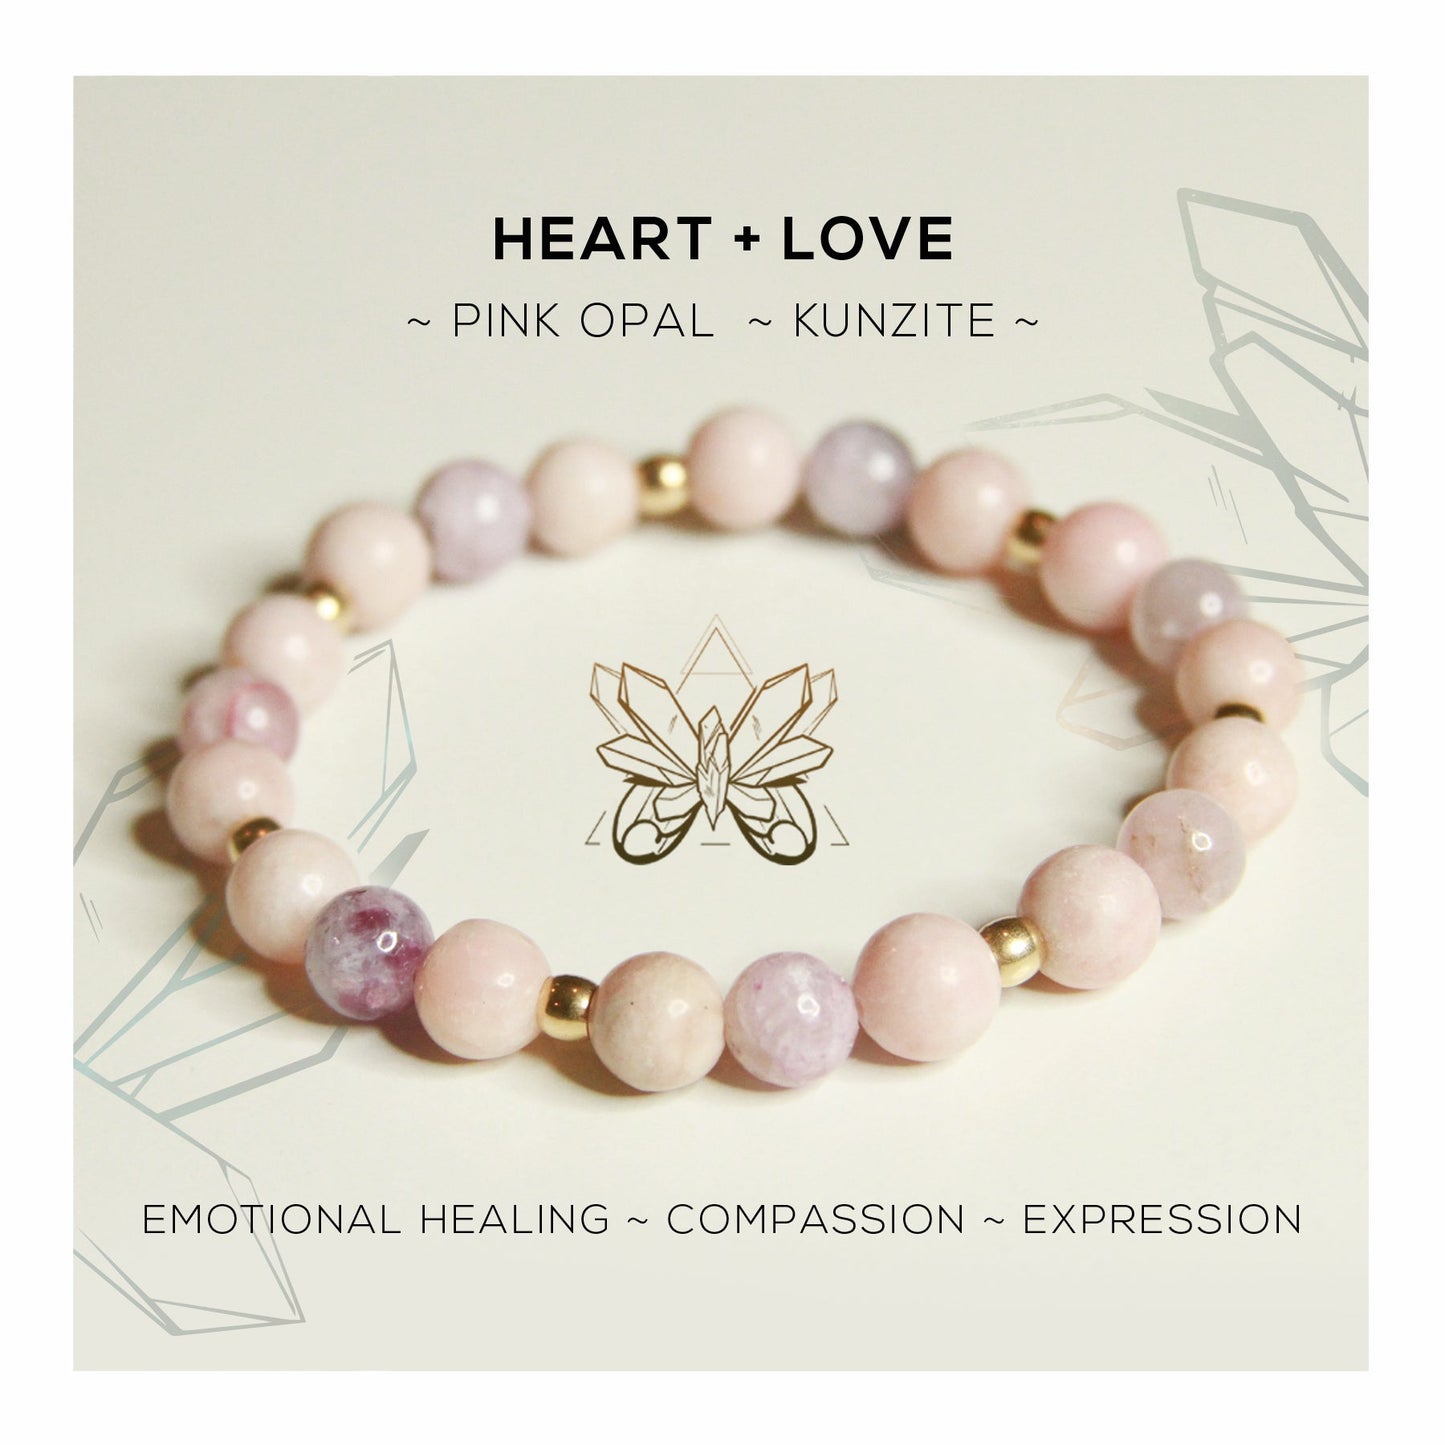 HEART + LOVE by Crystalline Tribe